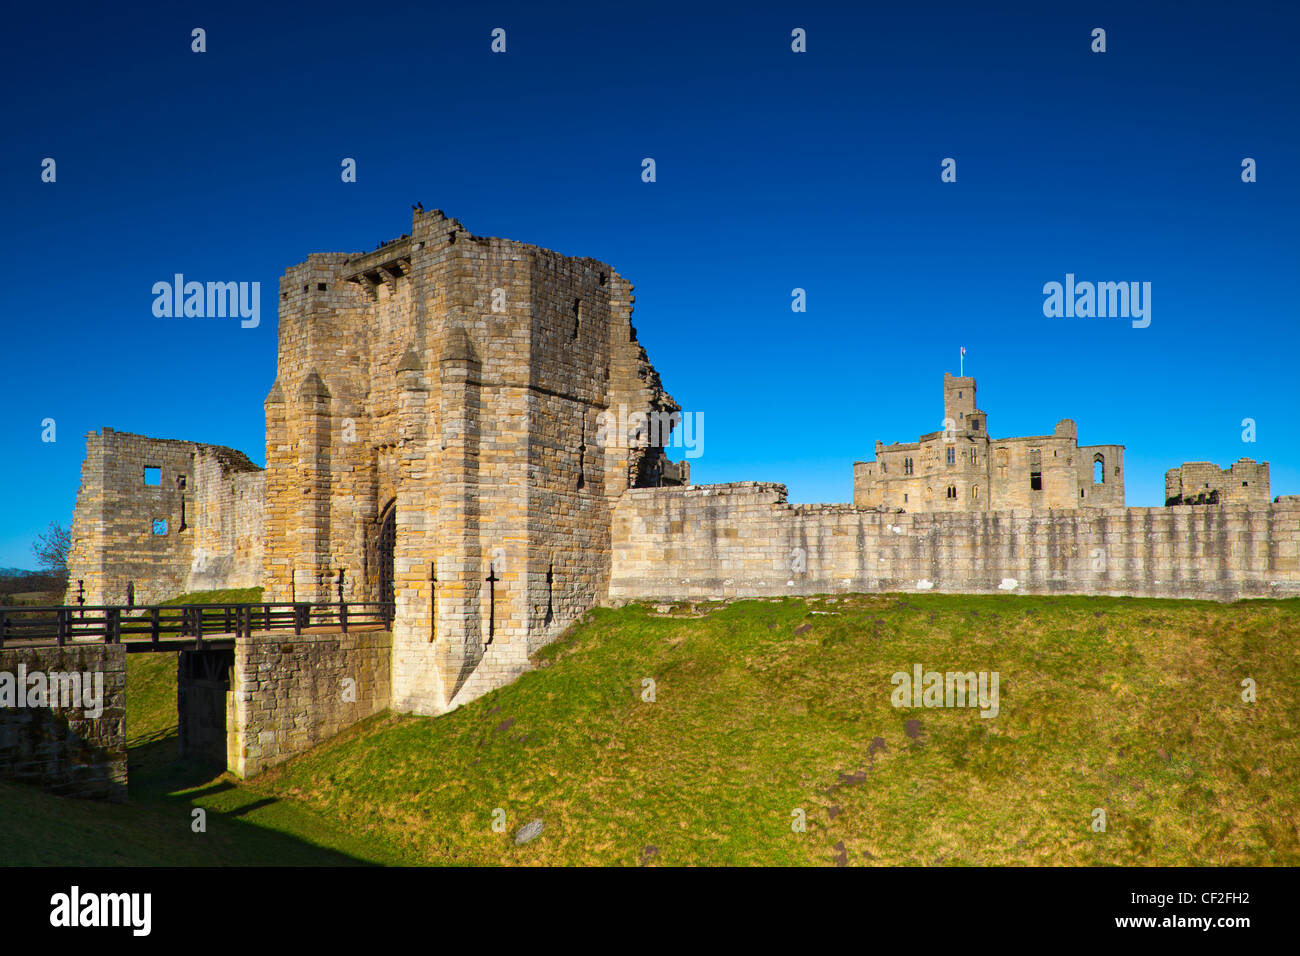 Warkworth Castle, a 12th century stone motte and bailey fortress located on a defensive mound in the village of Warkworth. Stock Photo